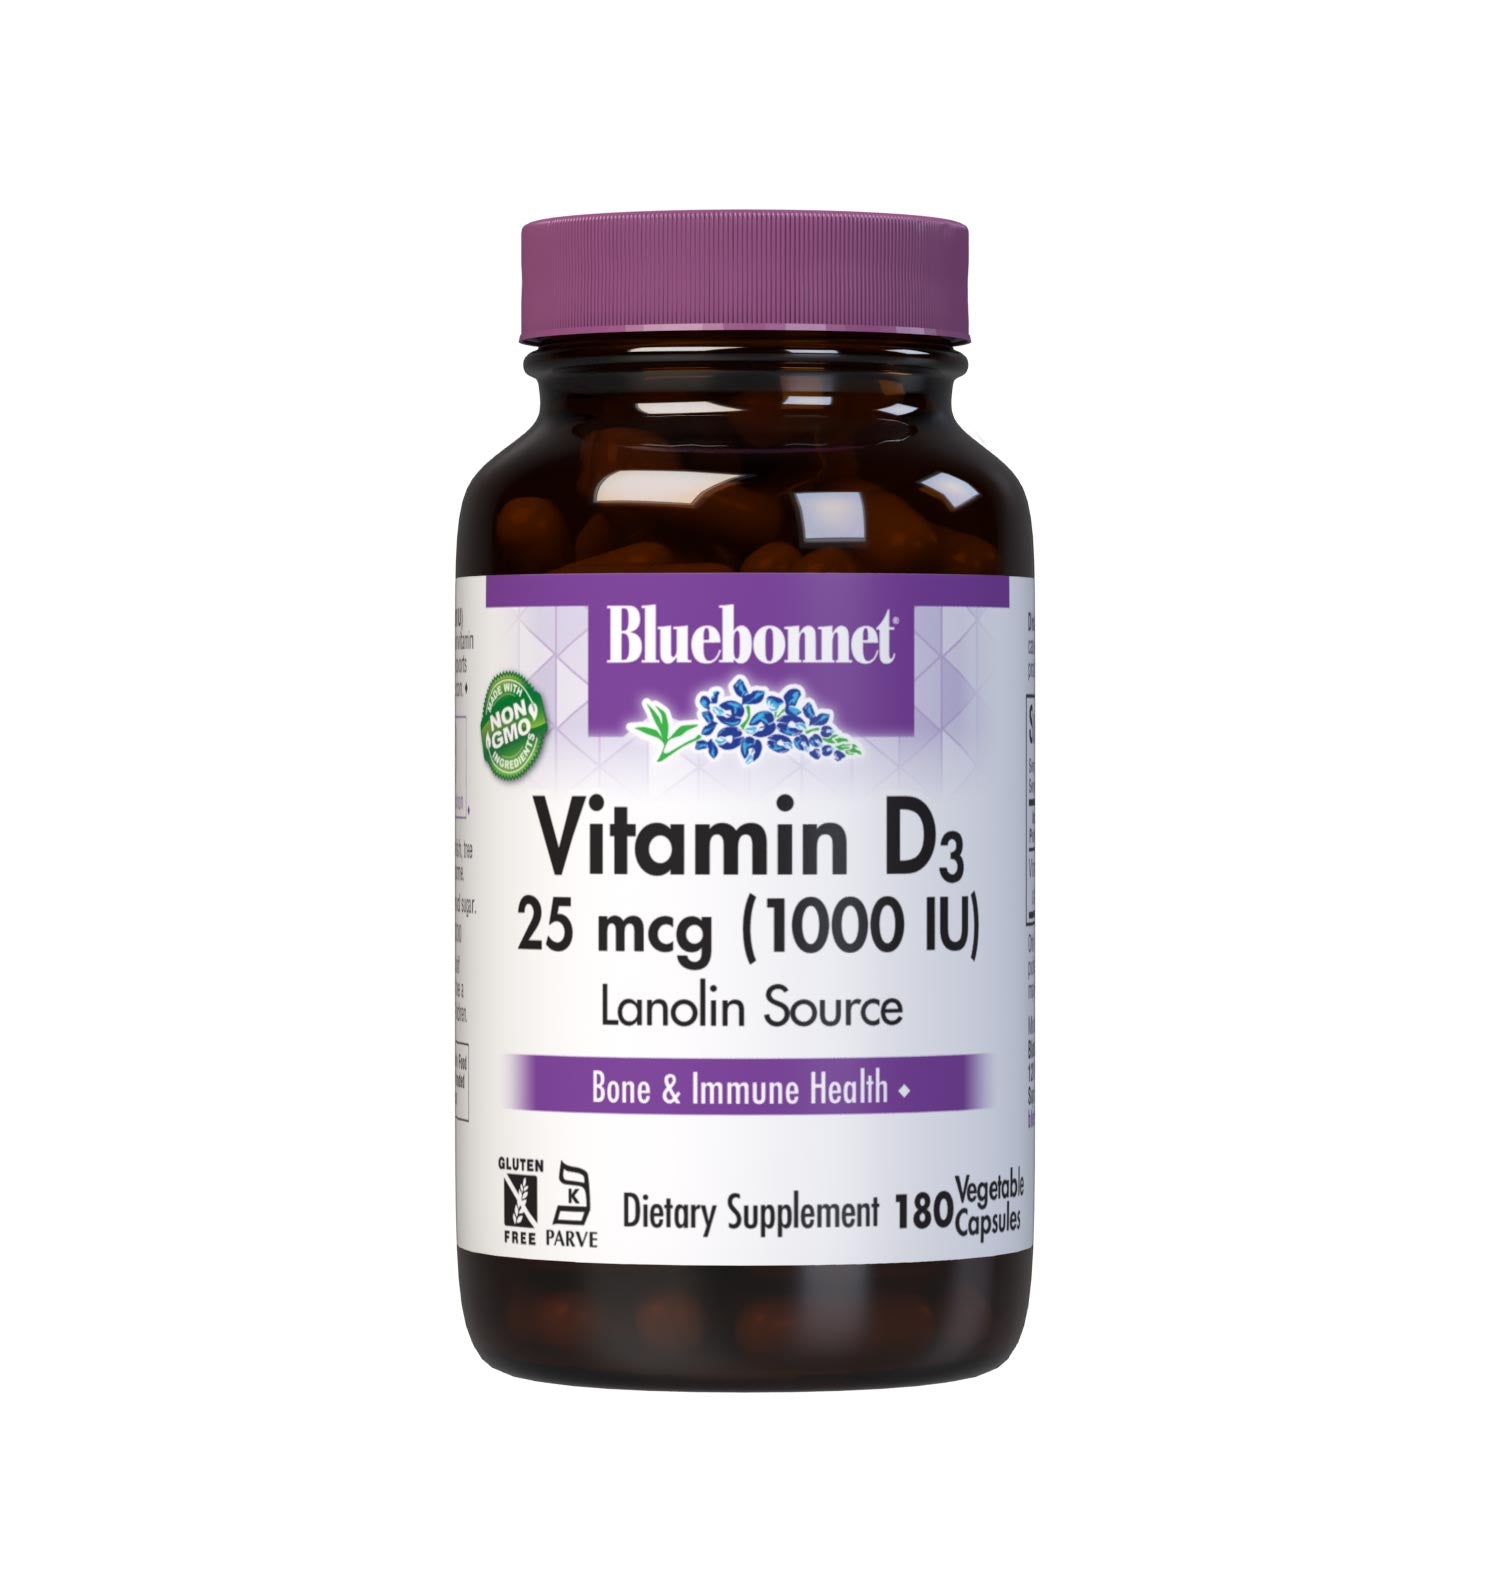 Bluebonnet’s Vitamin D3 1000 IU (25 mcg) Vegetable Capsules are formulated with vitamin D3 (cholecalciferol) from lanolin that supports strong healthy bones and immune function. #size_180 count